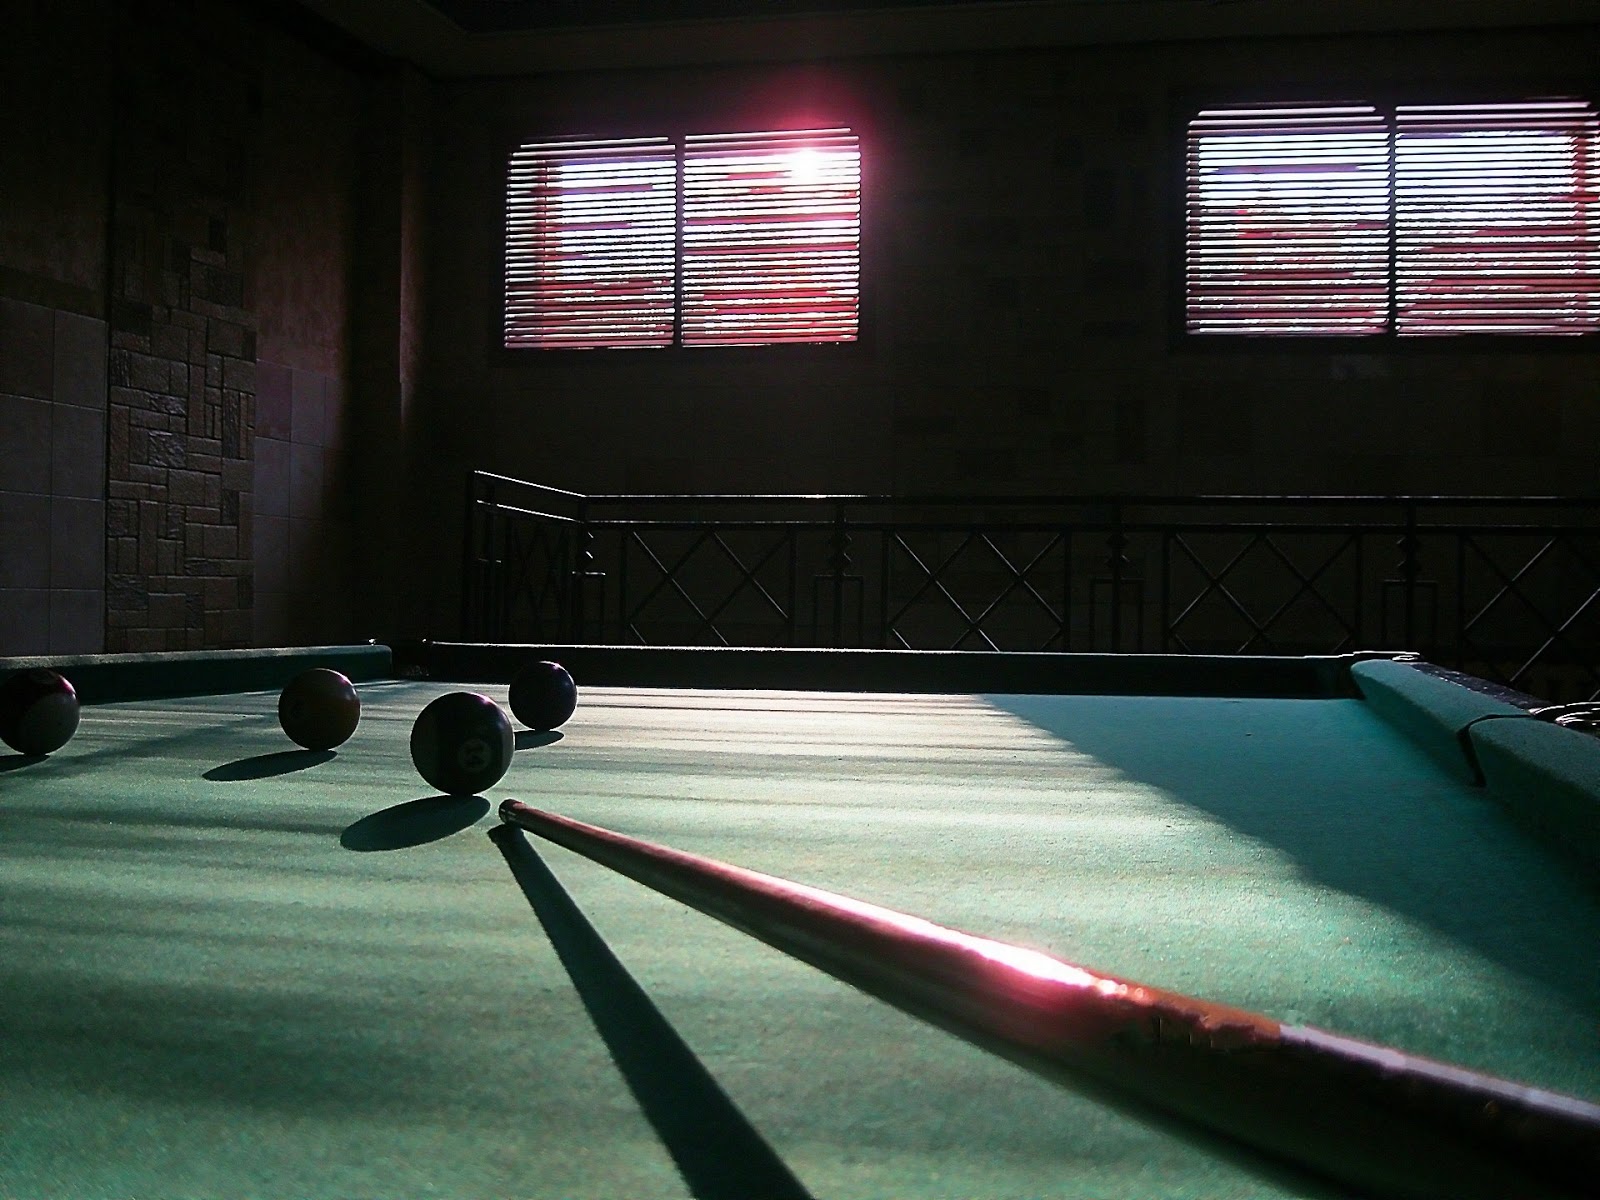 pool table wallpaper,billiard table,pool,indoor games and sports,billiards,games